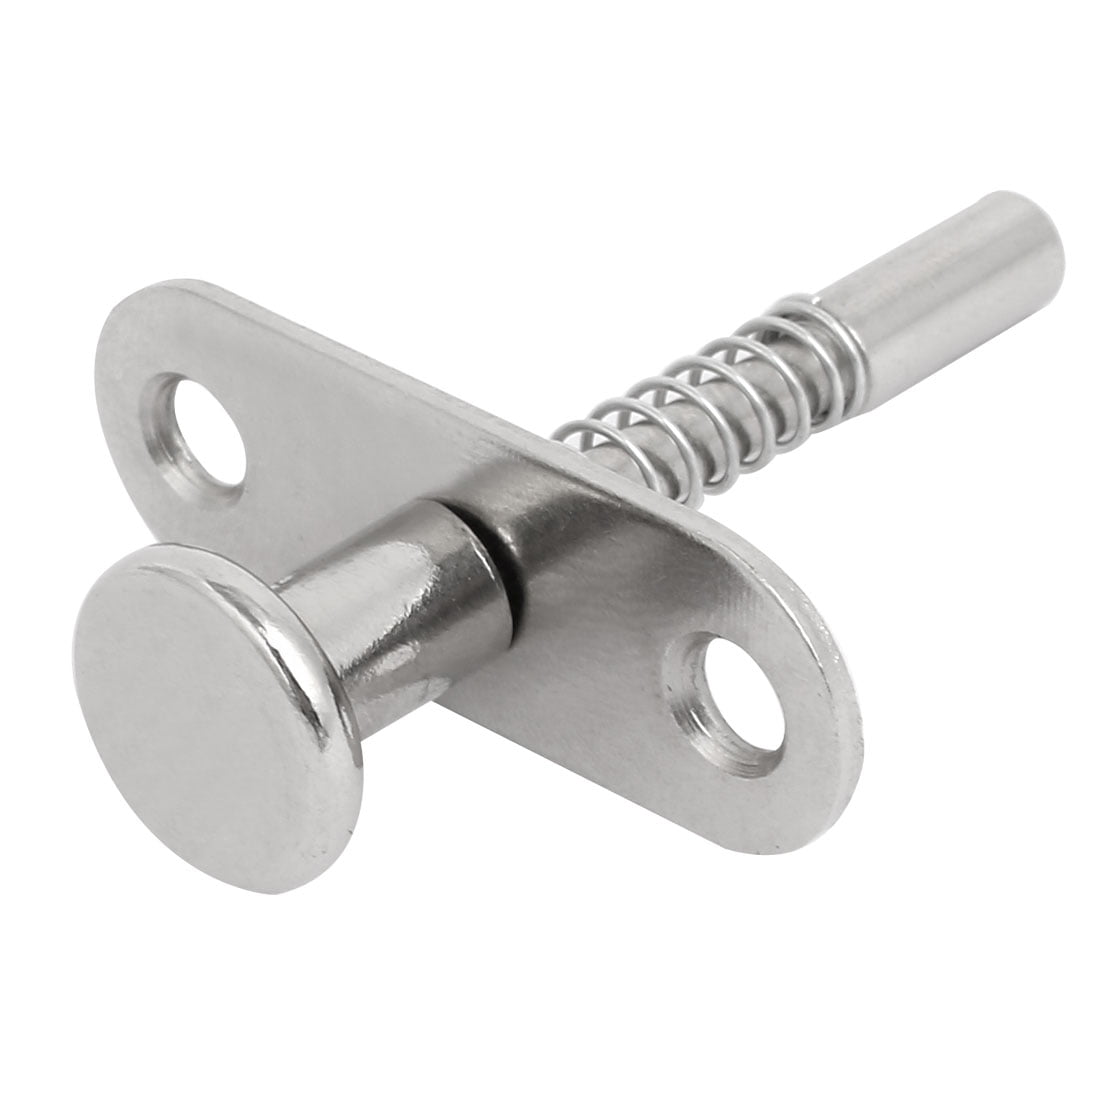 Stainless Steel Spring Quick Release Lock Pin 5mm Dia W Plate Walmart 